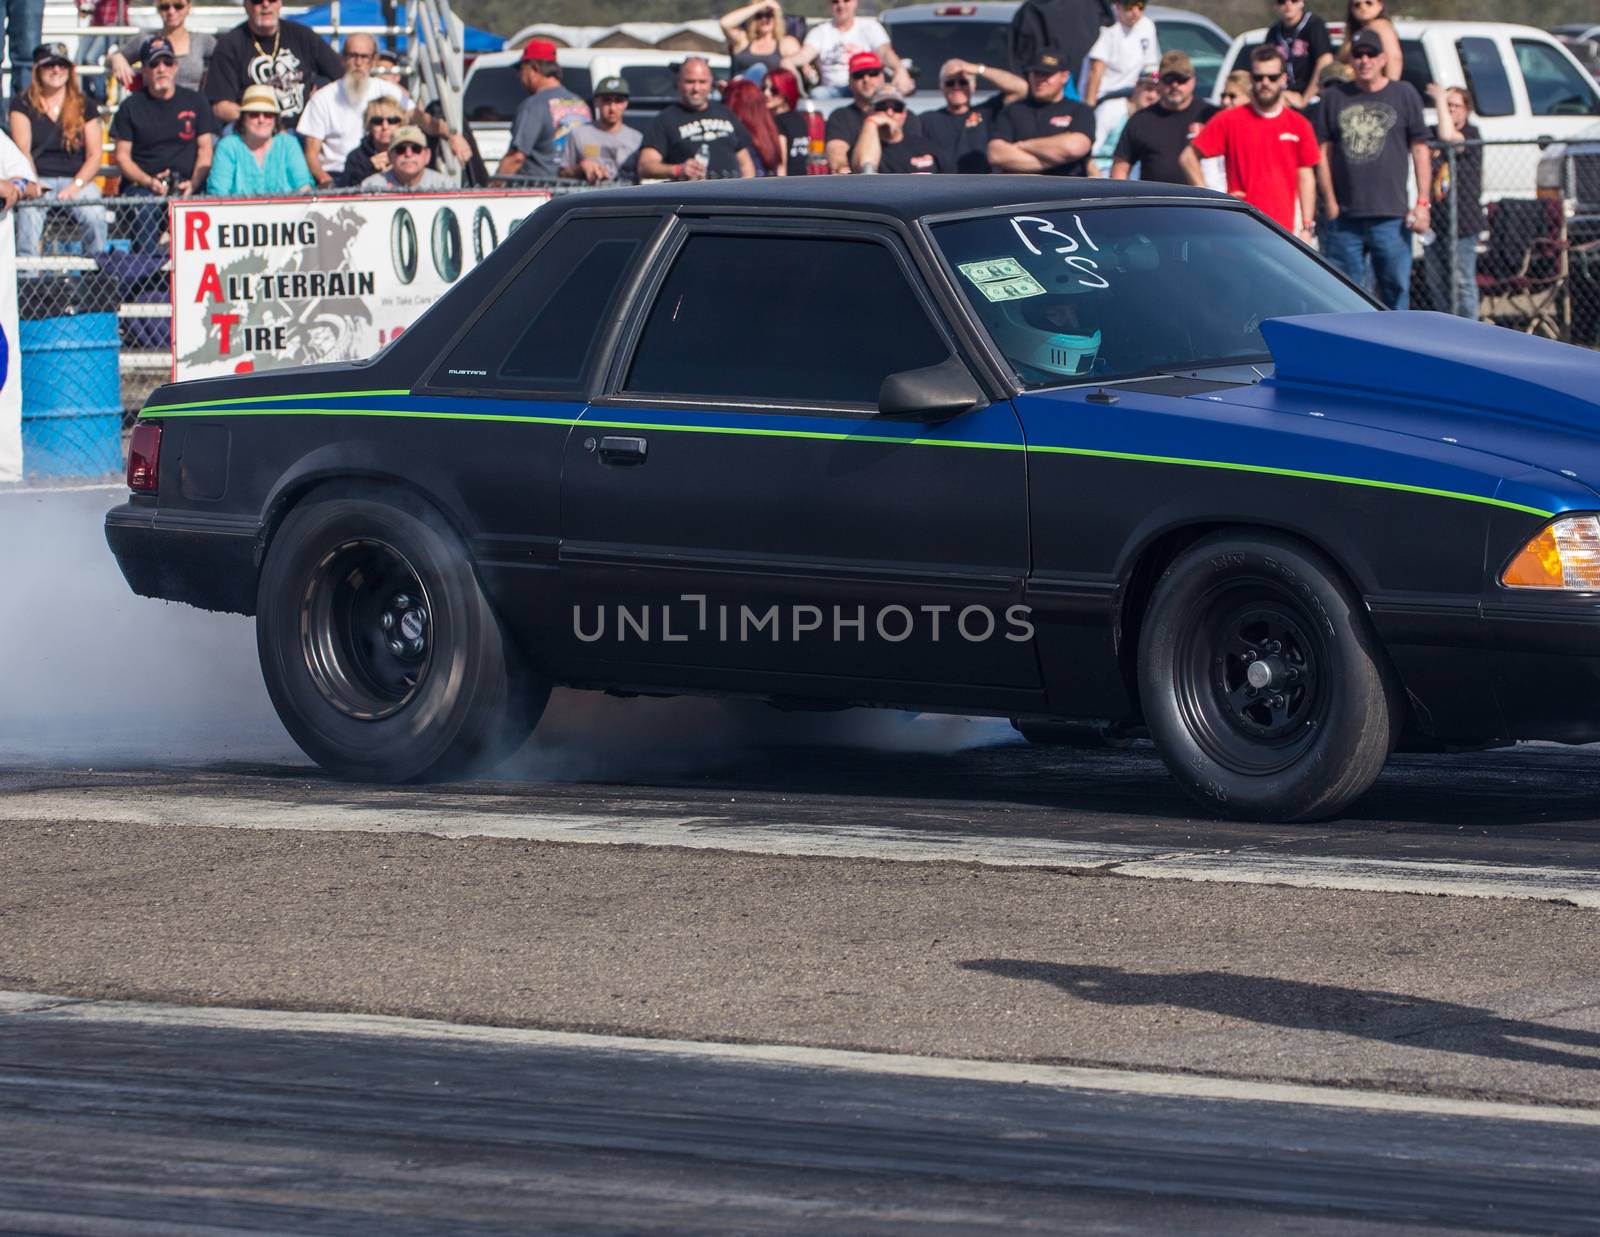 Redding, California: A hot rod burns rubber to get better friction for it's tires before a drag race.
Photo taken on: February 13th, 2016